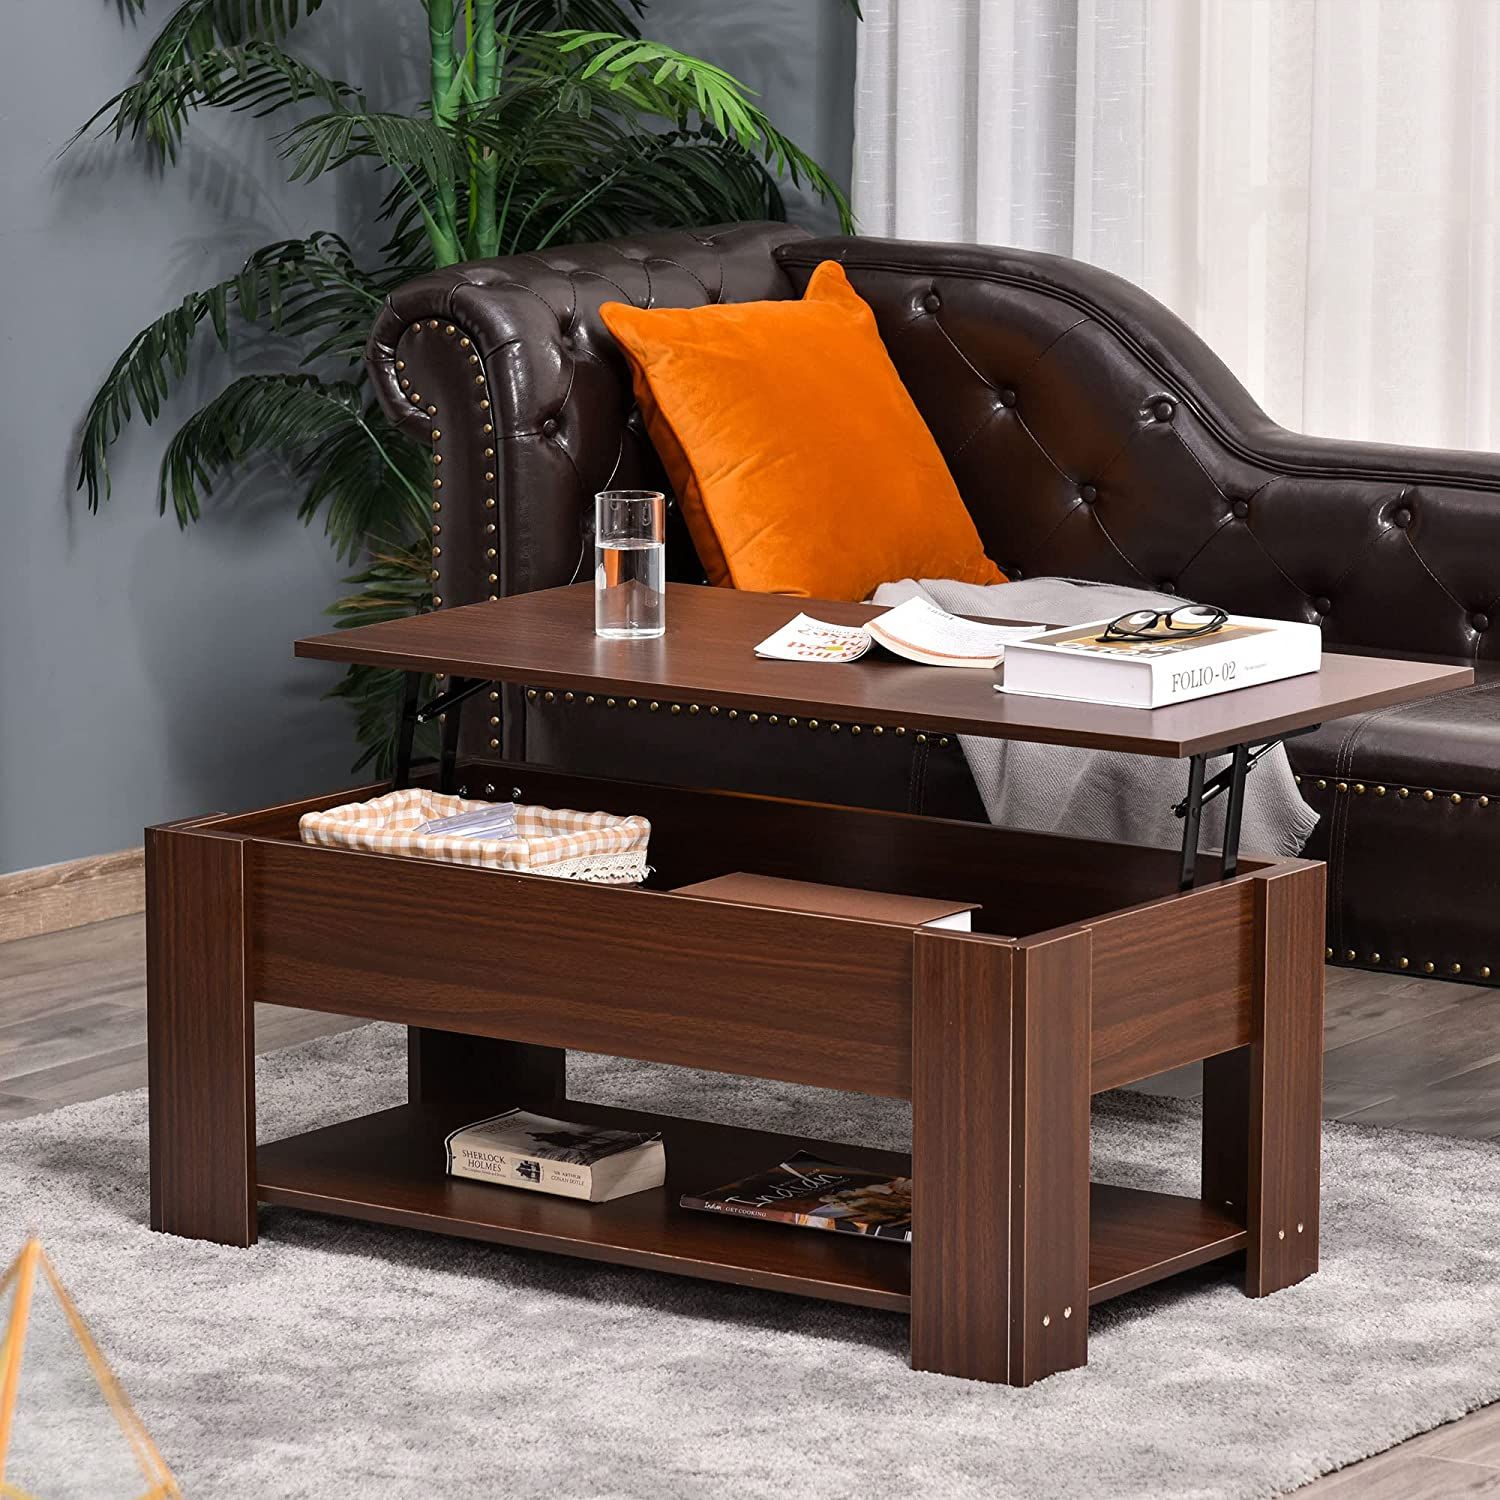 Lift Top Coffee Table With Hidden Storage Compartment And Open Shelf, Pop  Up Coffee Table For Living Room, Brown – Walmart Pertaining To Coffee Tables With Compartment (View 8 of 20)